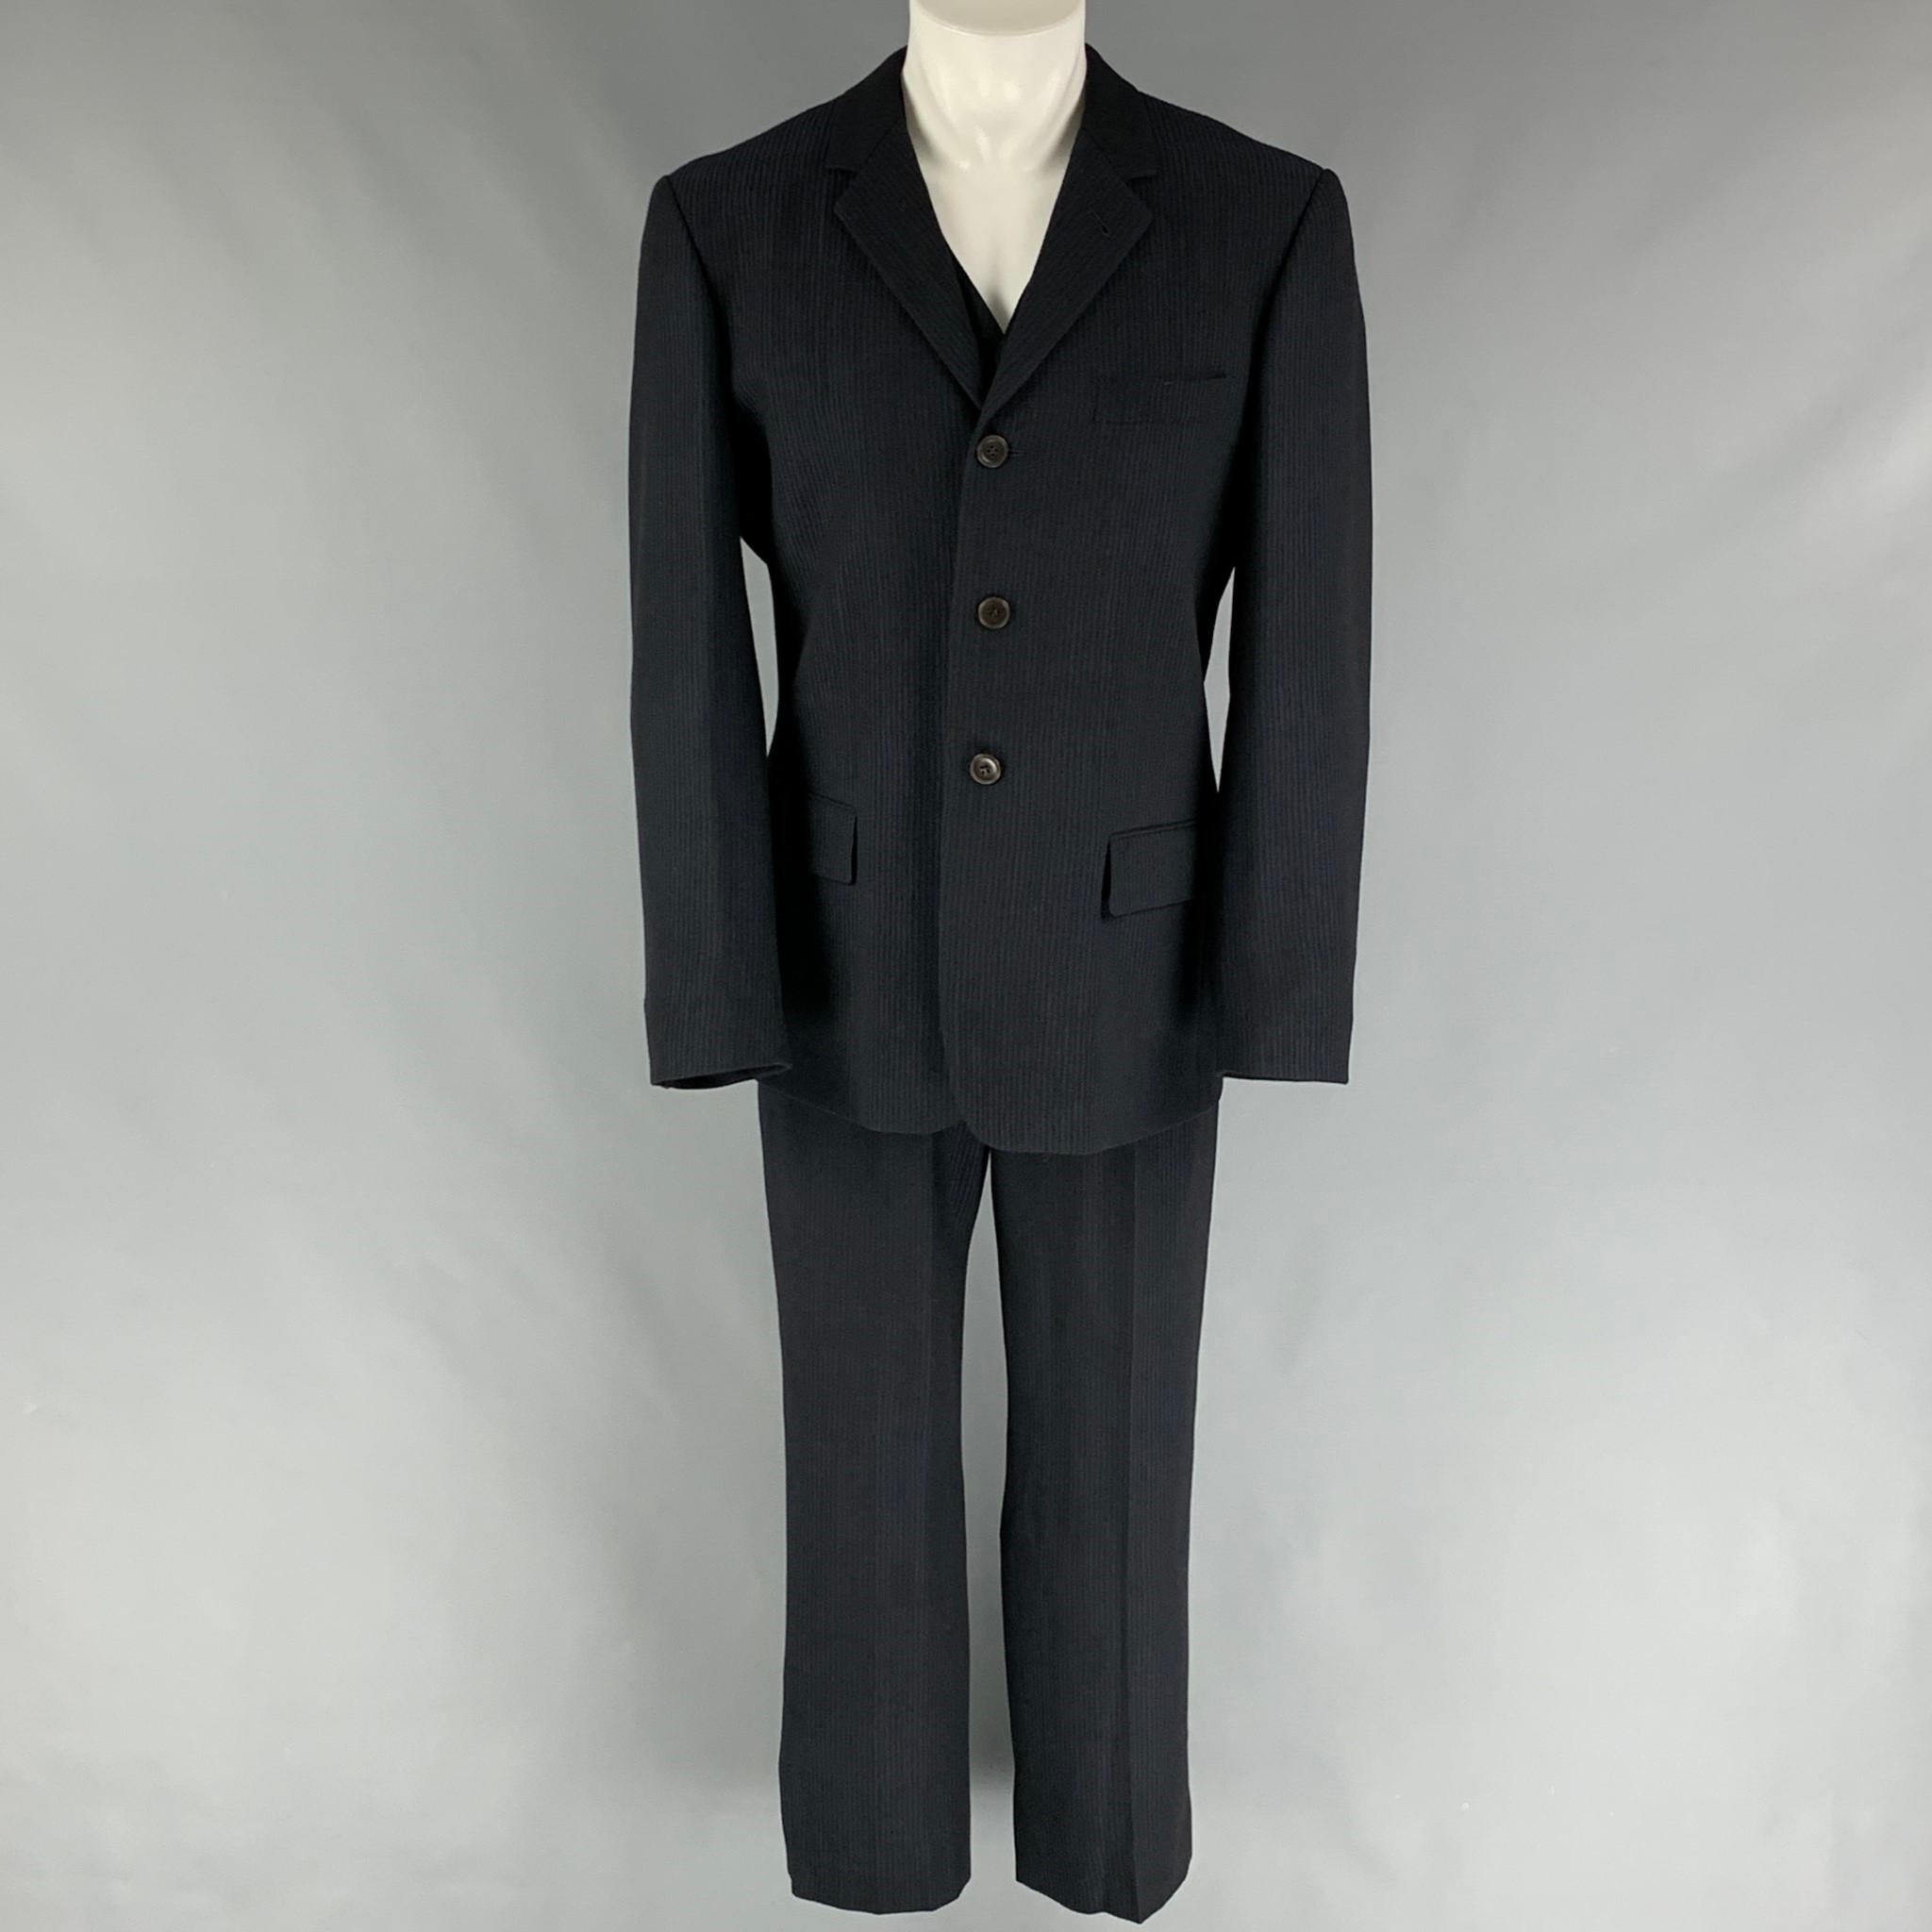 JEAN PAUL GAULTIER suit comes in a navy & black stripe wool featuring a jumpsuit style, flap pockets, zip fly closure, and a matching blazer. Made in Italy. 

Very Good Pre-Owned Condition.
Marked: I 50 / E 50 / GB 40 / USA 40

Measurements:

